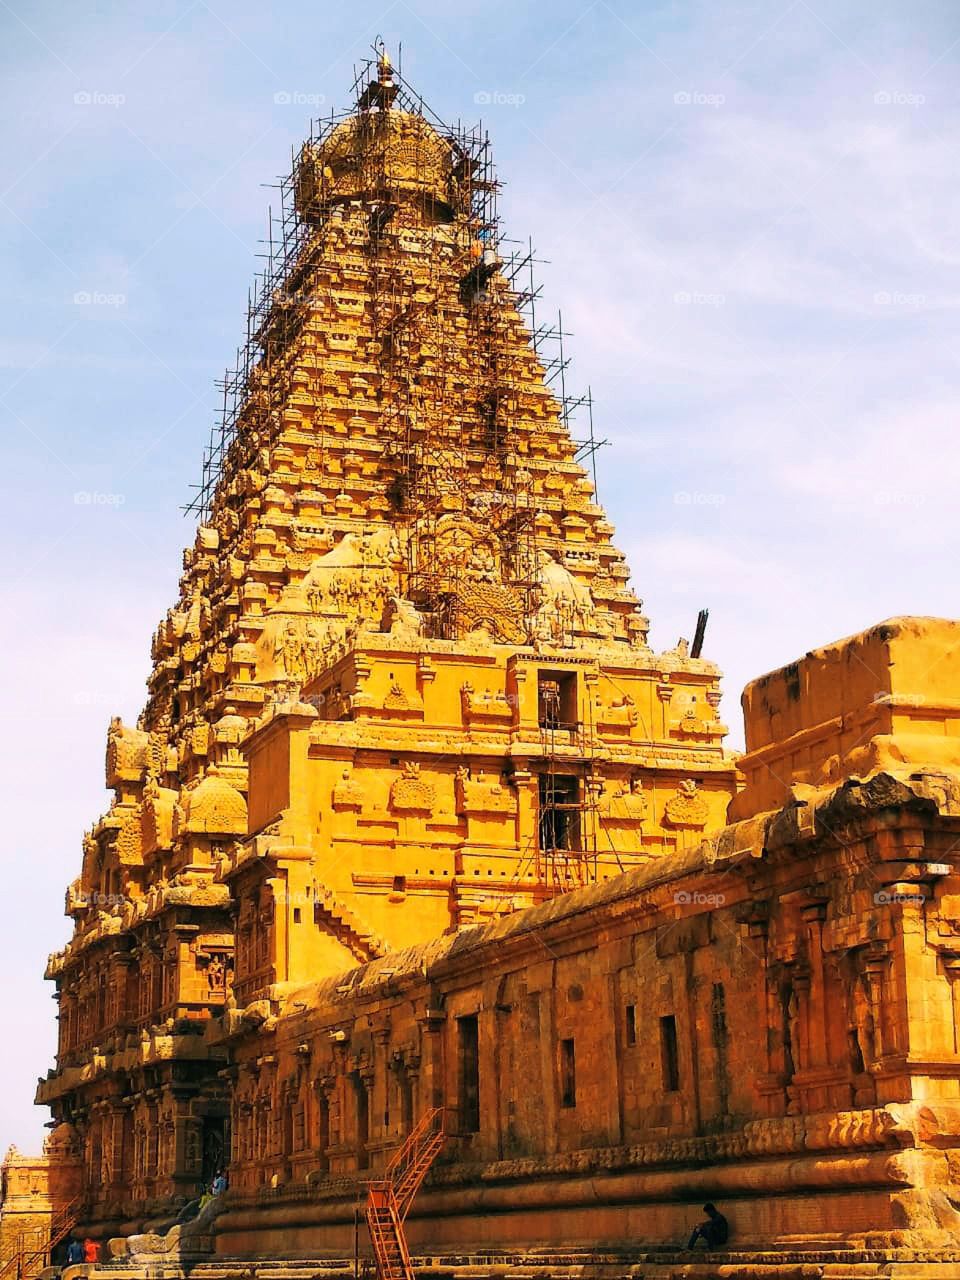 This is a temple named Brihadeeswara in Thanjavur, Tamilnadu state. This temple is dedicated to god shiva! It is one of the largest South Indian temples.